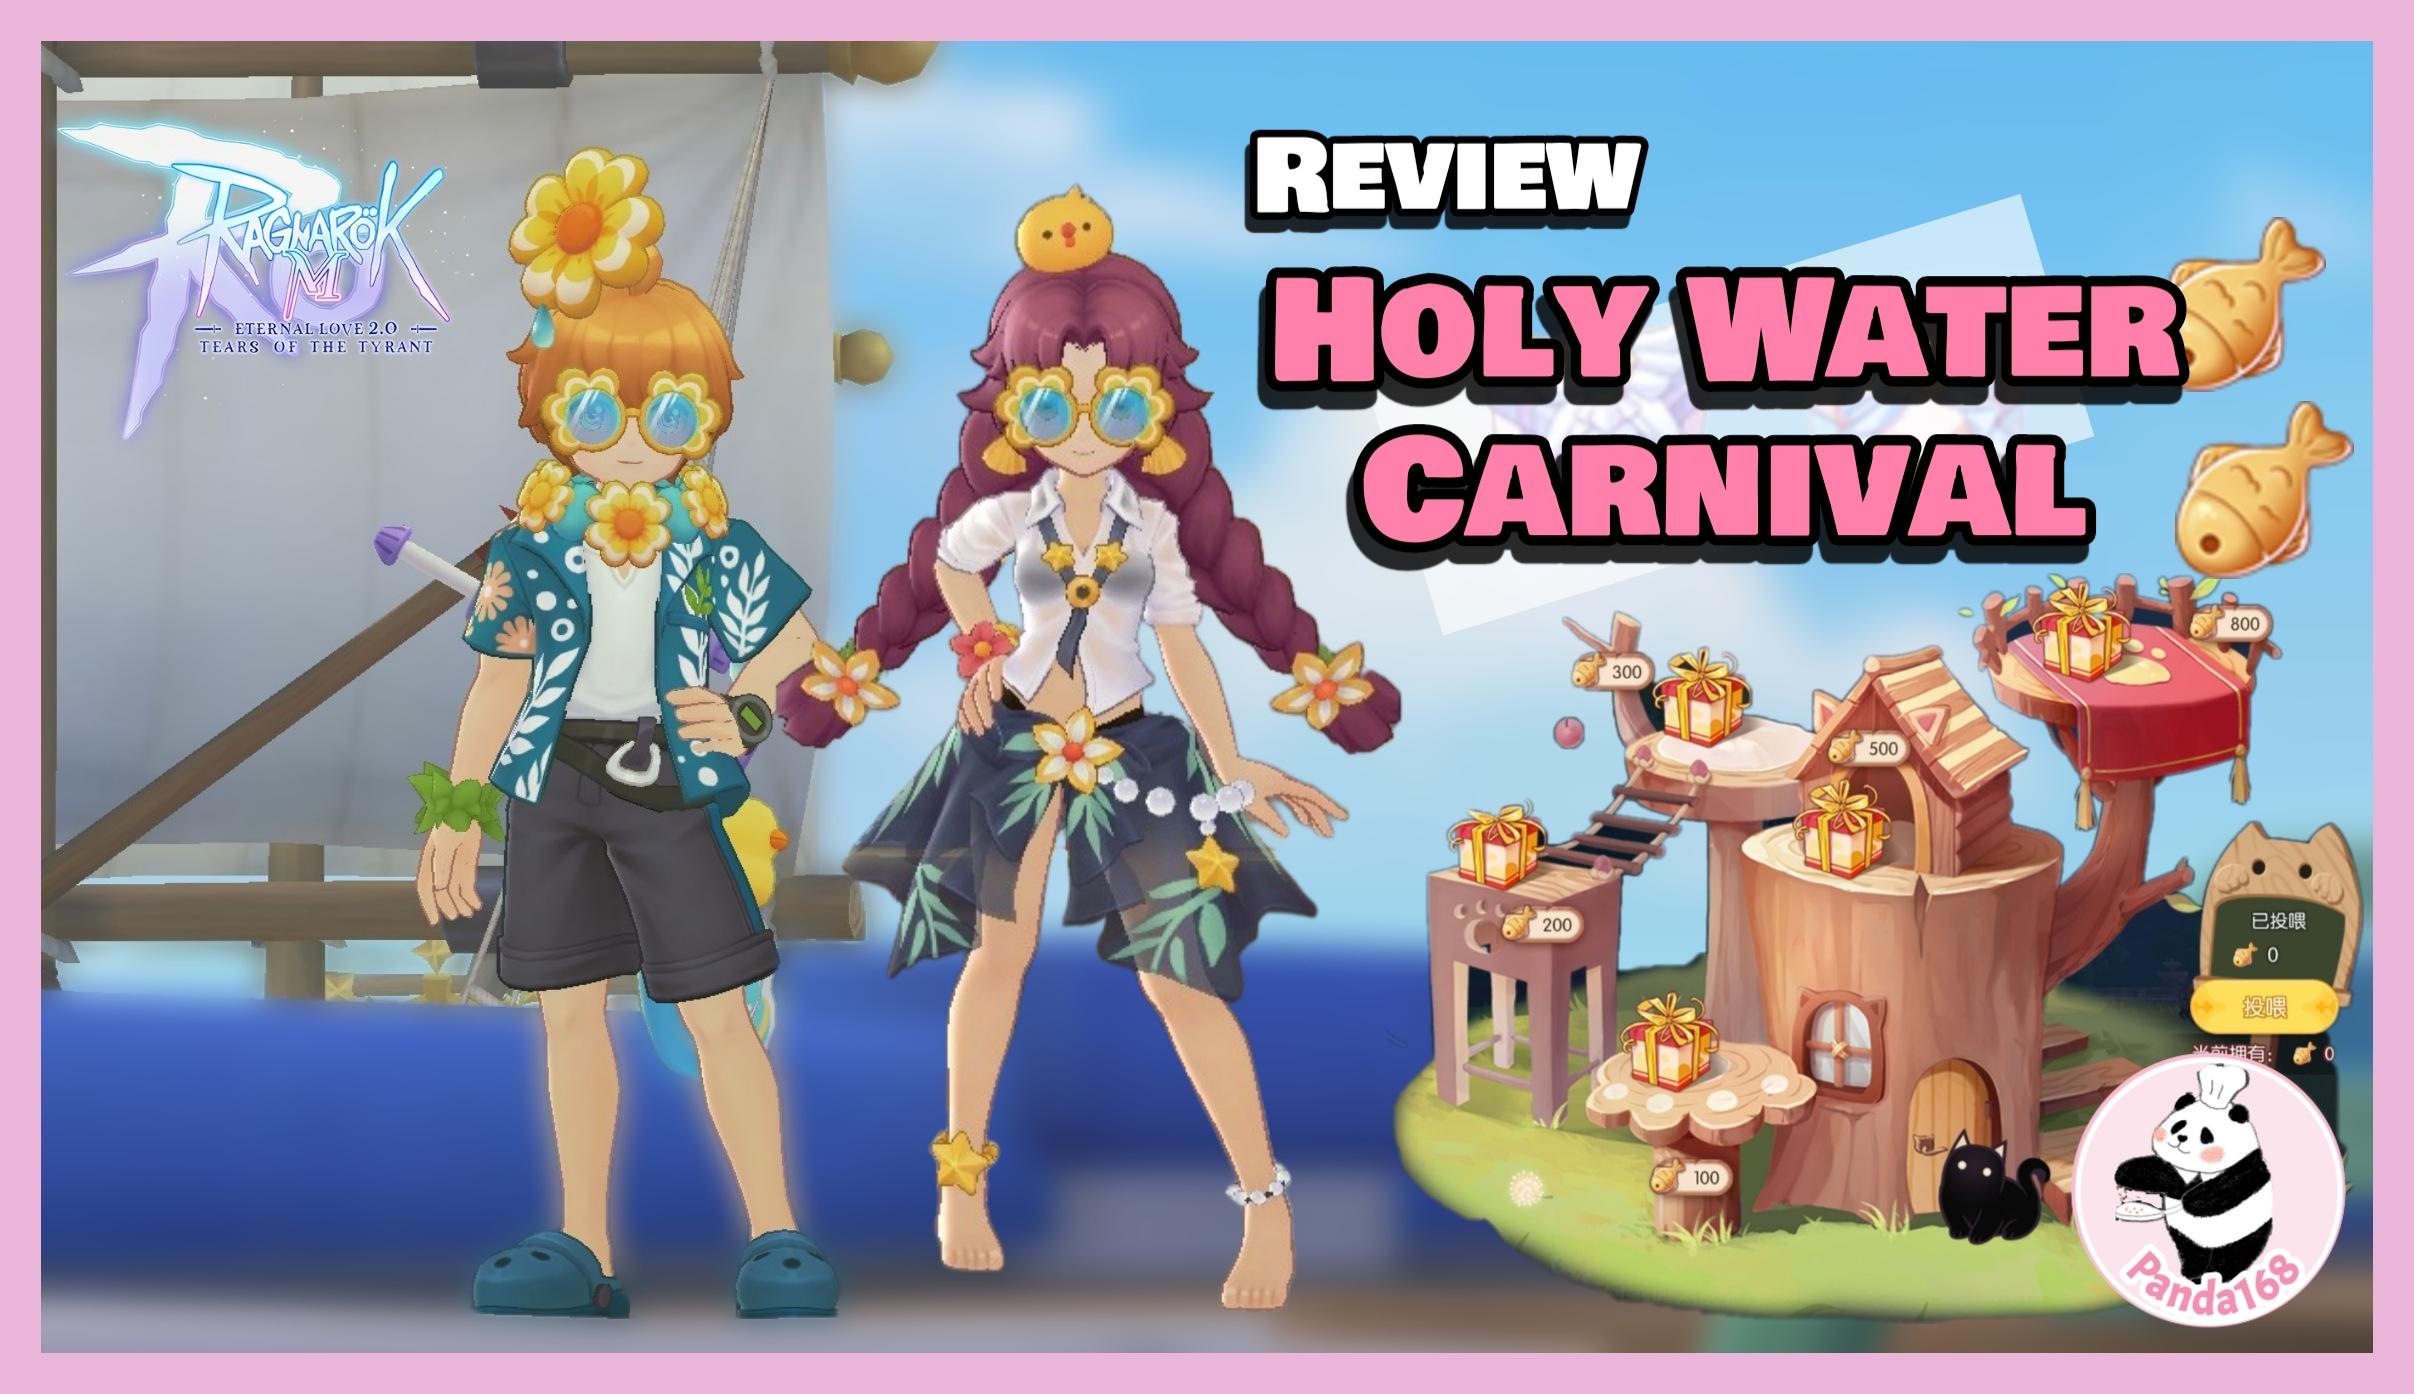 Ragnarok M: Review Holy Water Carnival